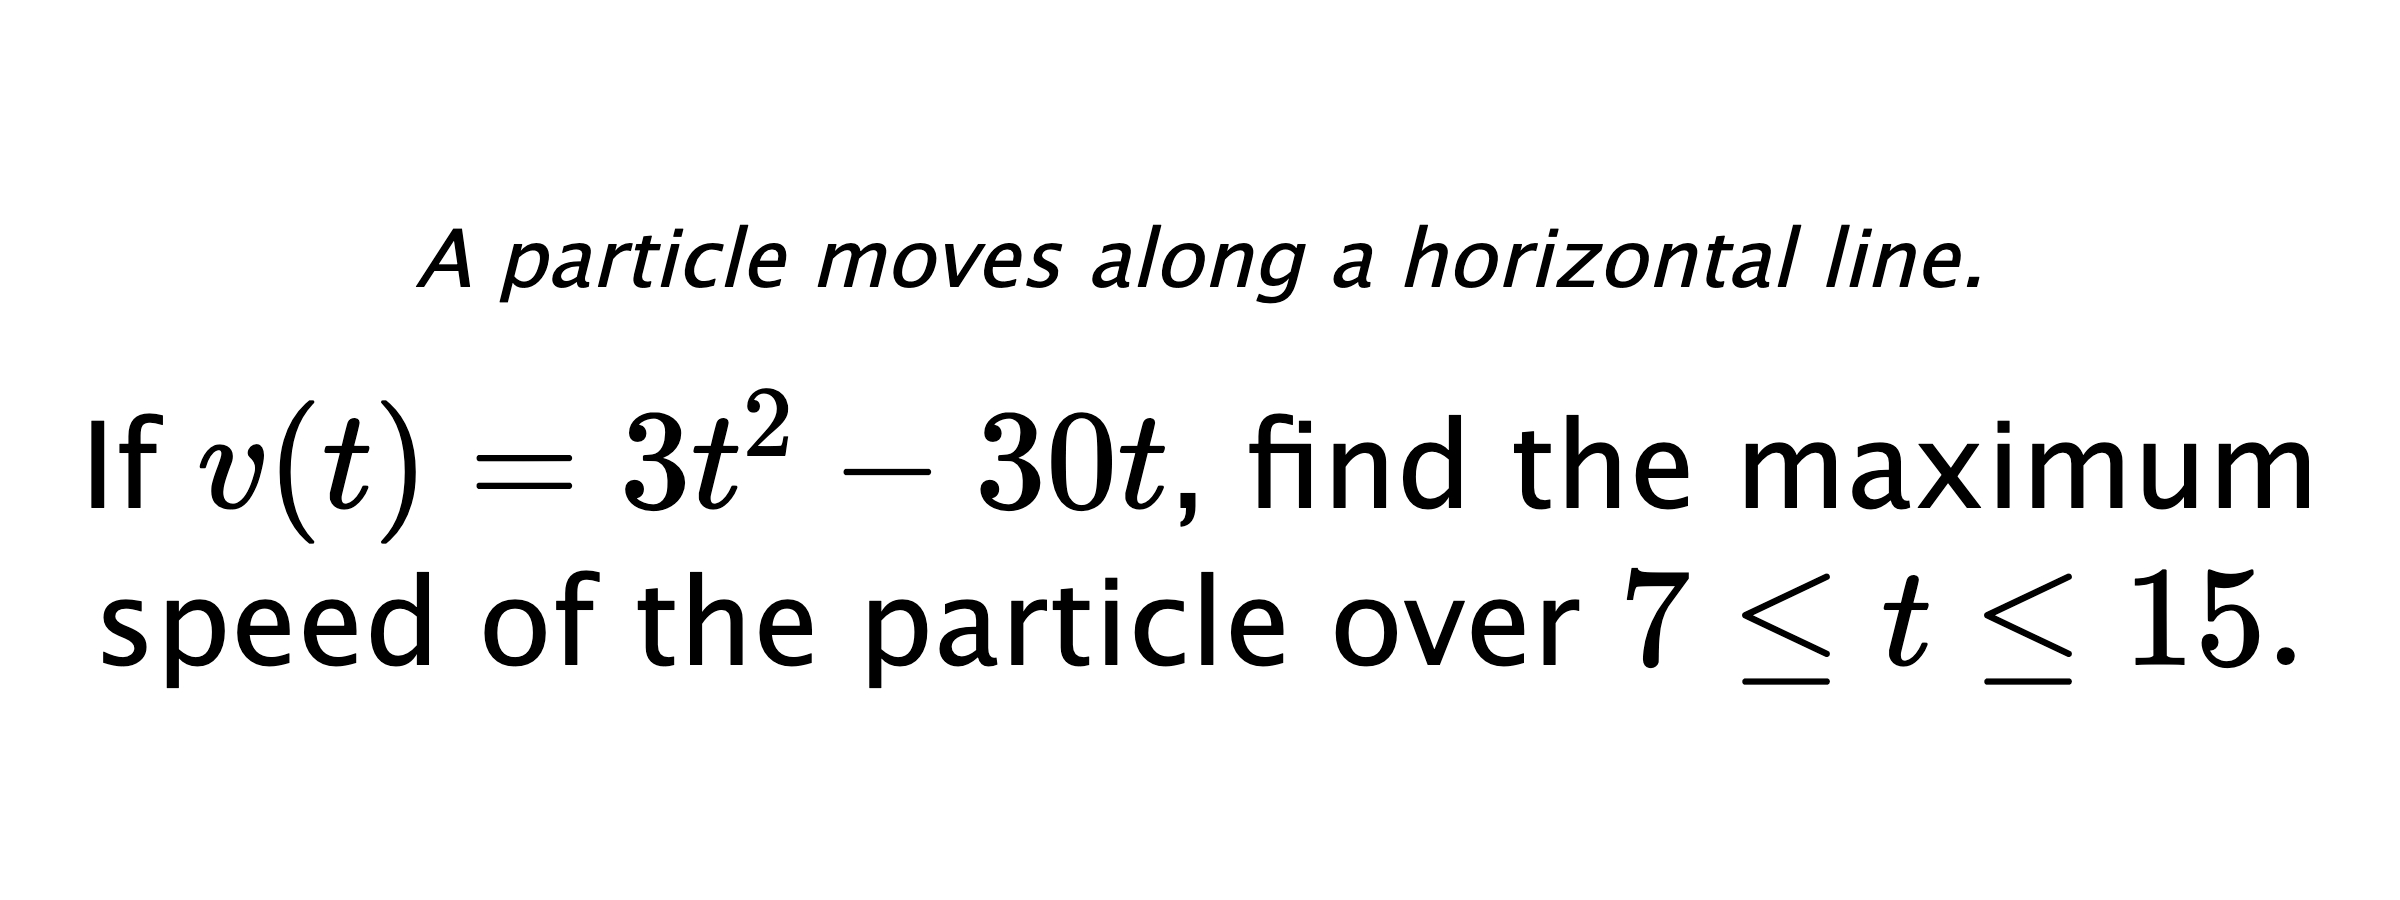 A particle moves along a horizontal line. If $ v(t)=3t^2-30t $, find the maximum speed of the particle over $ 7 \leq t \leq 15 .$